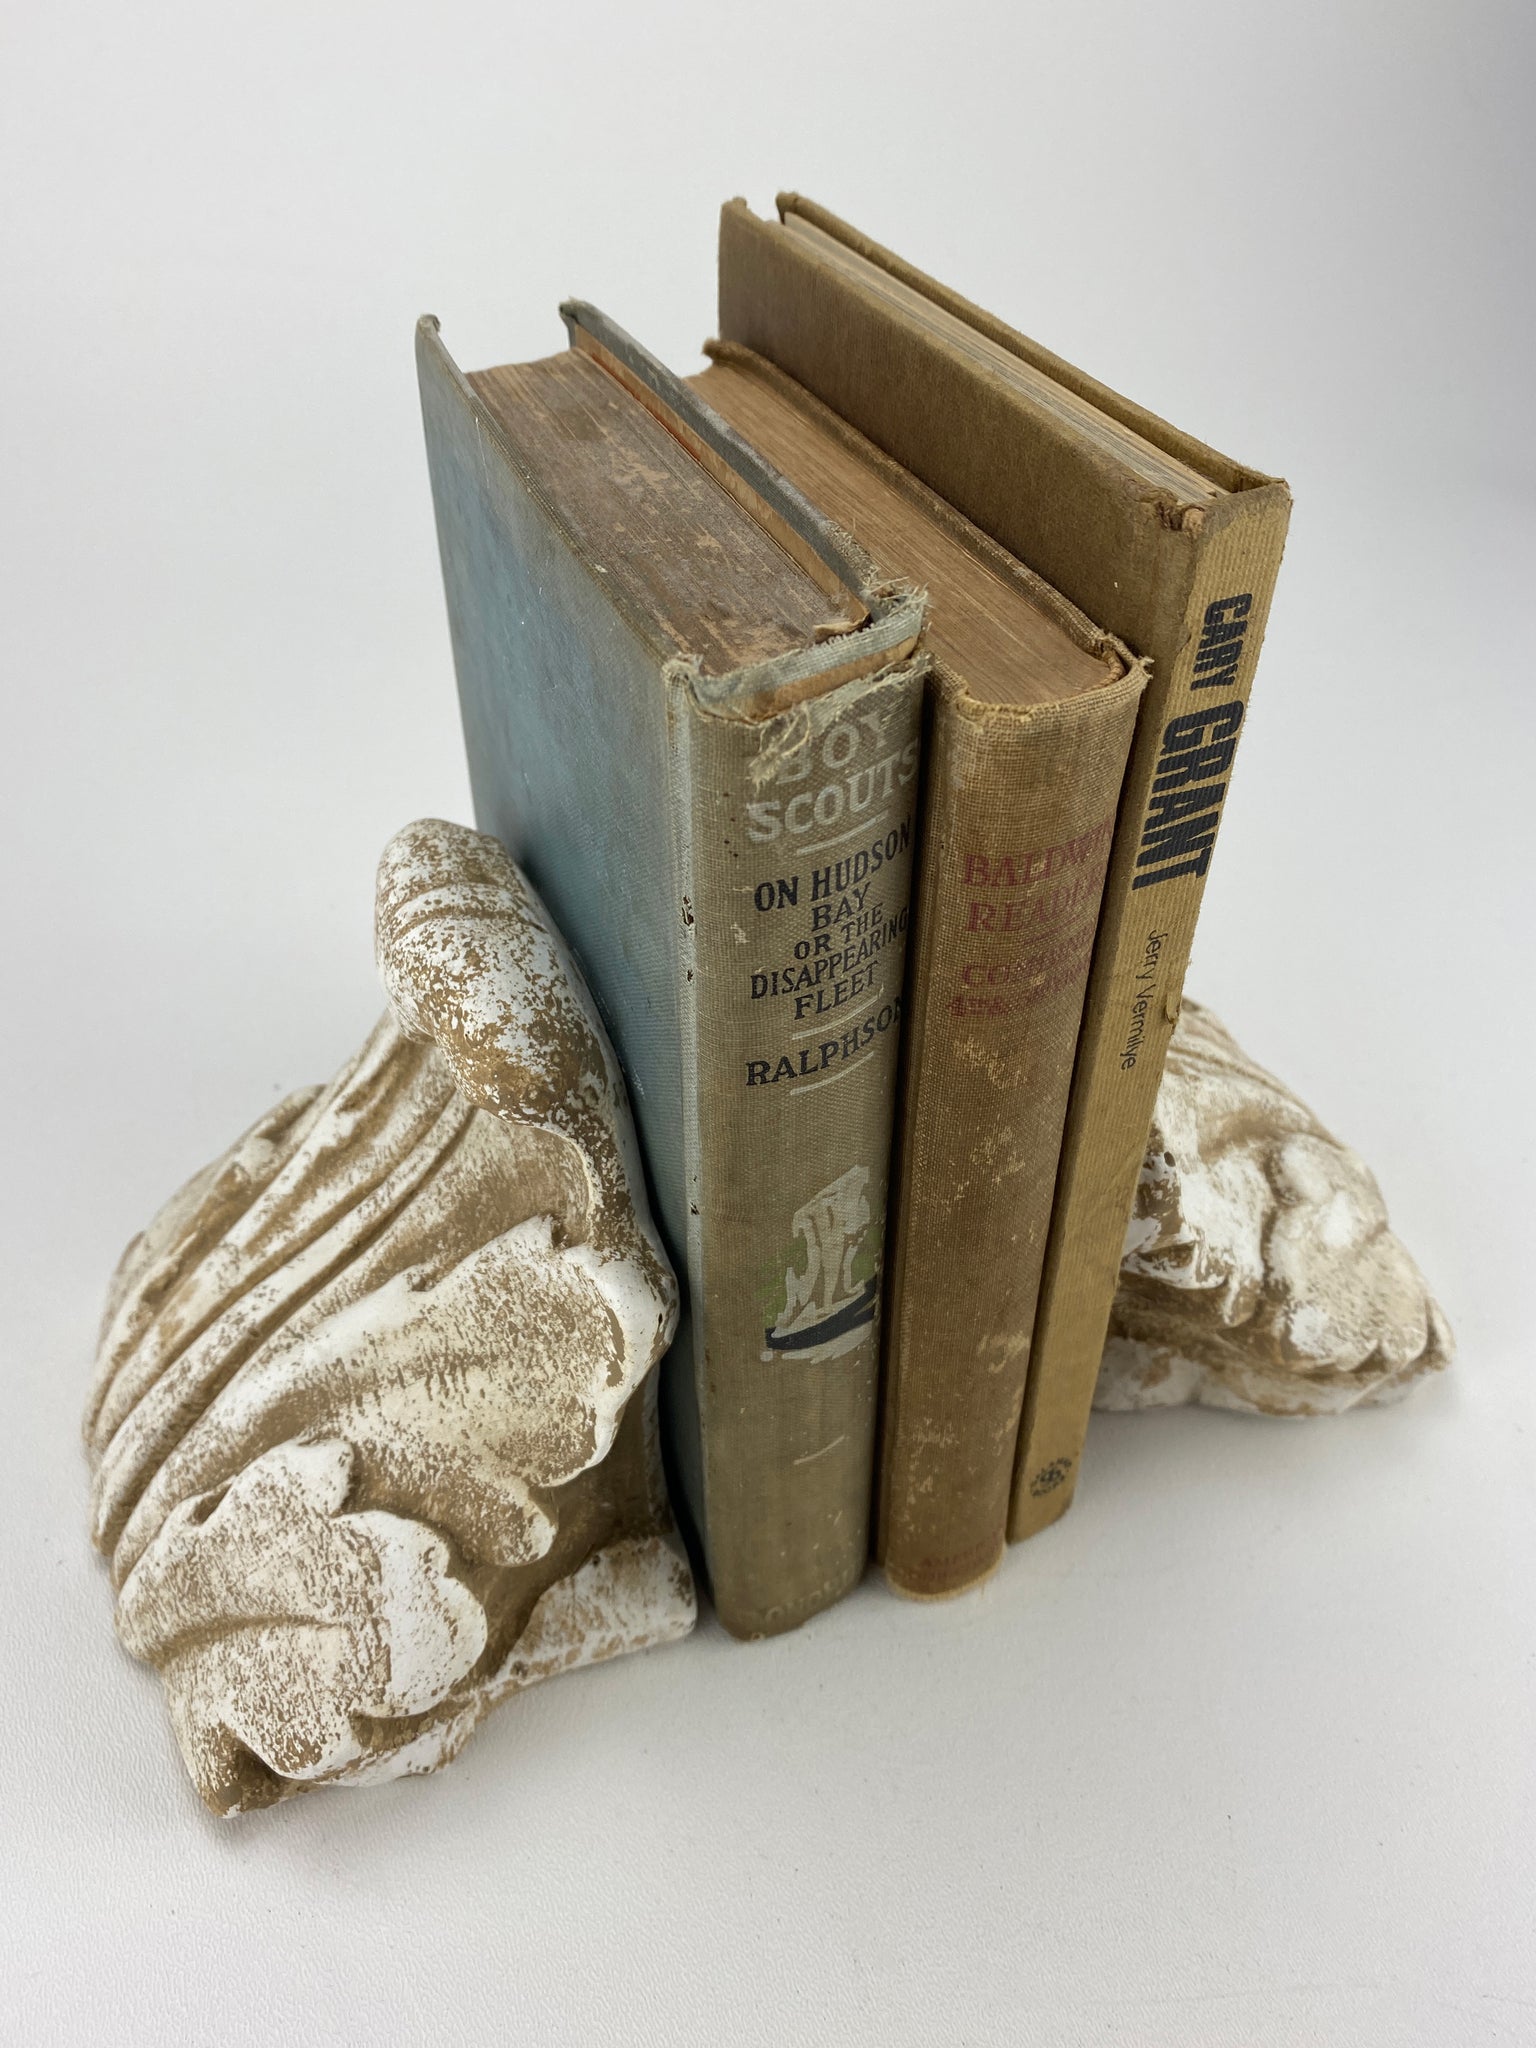 Acanthus Leaf BookEnds